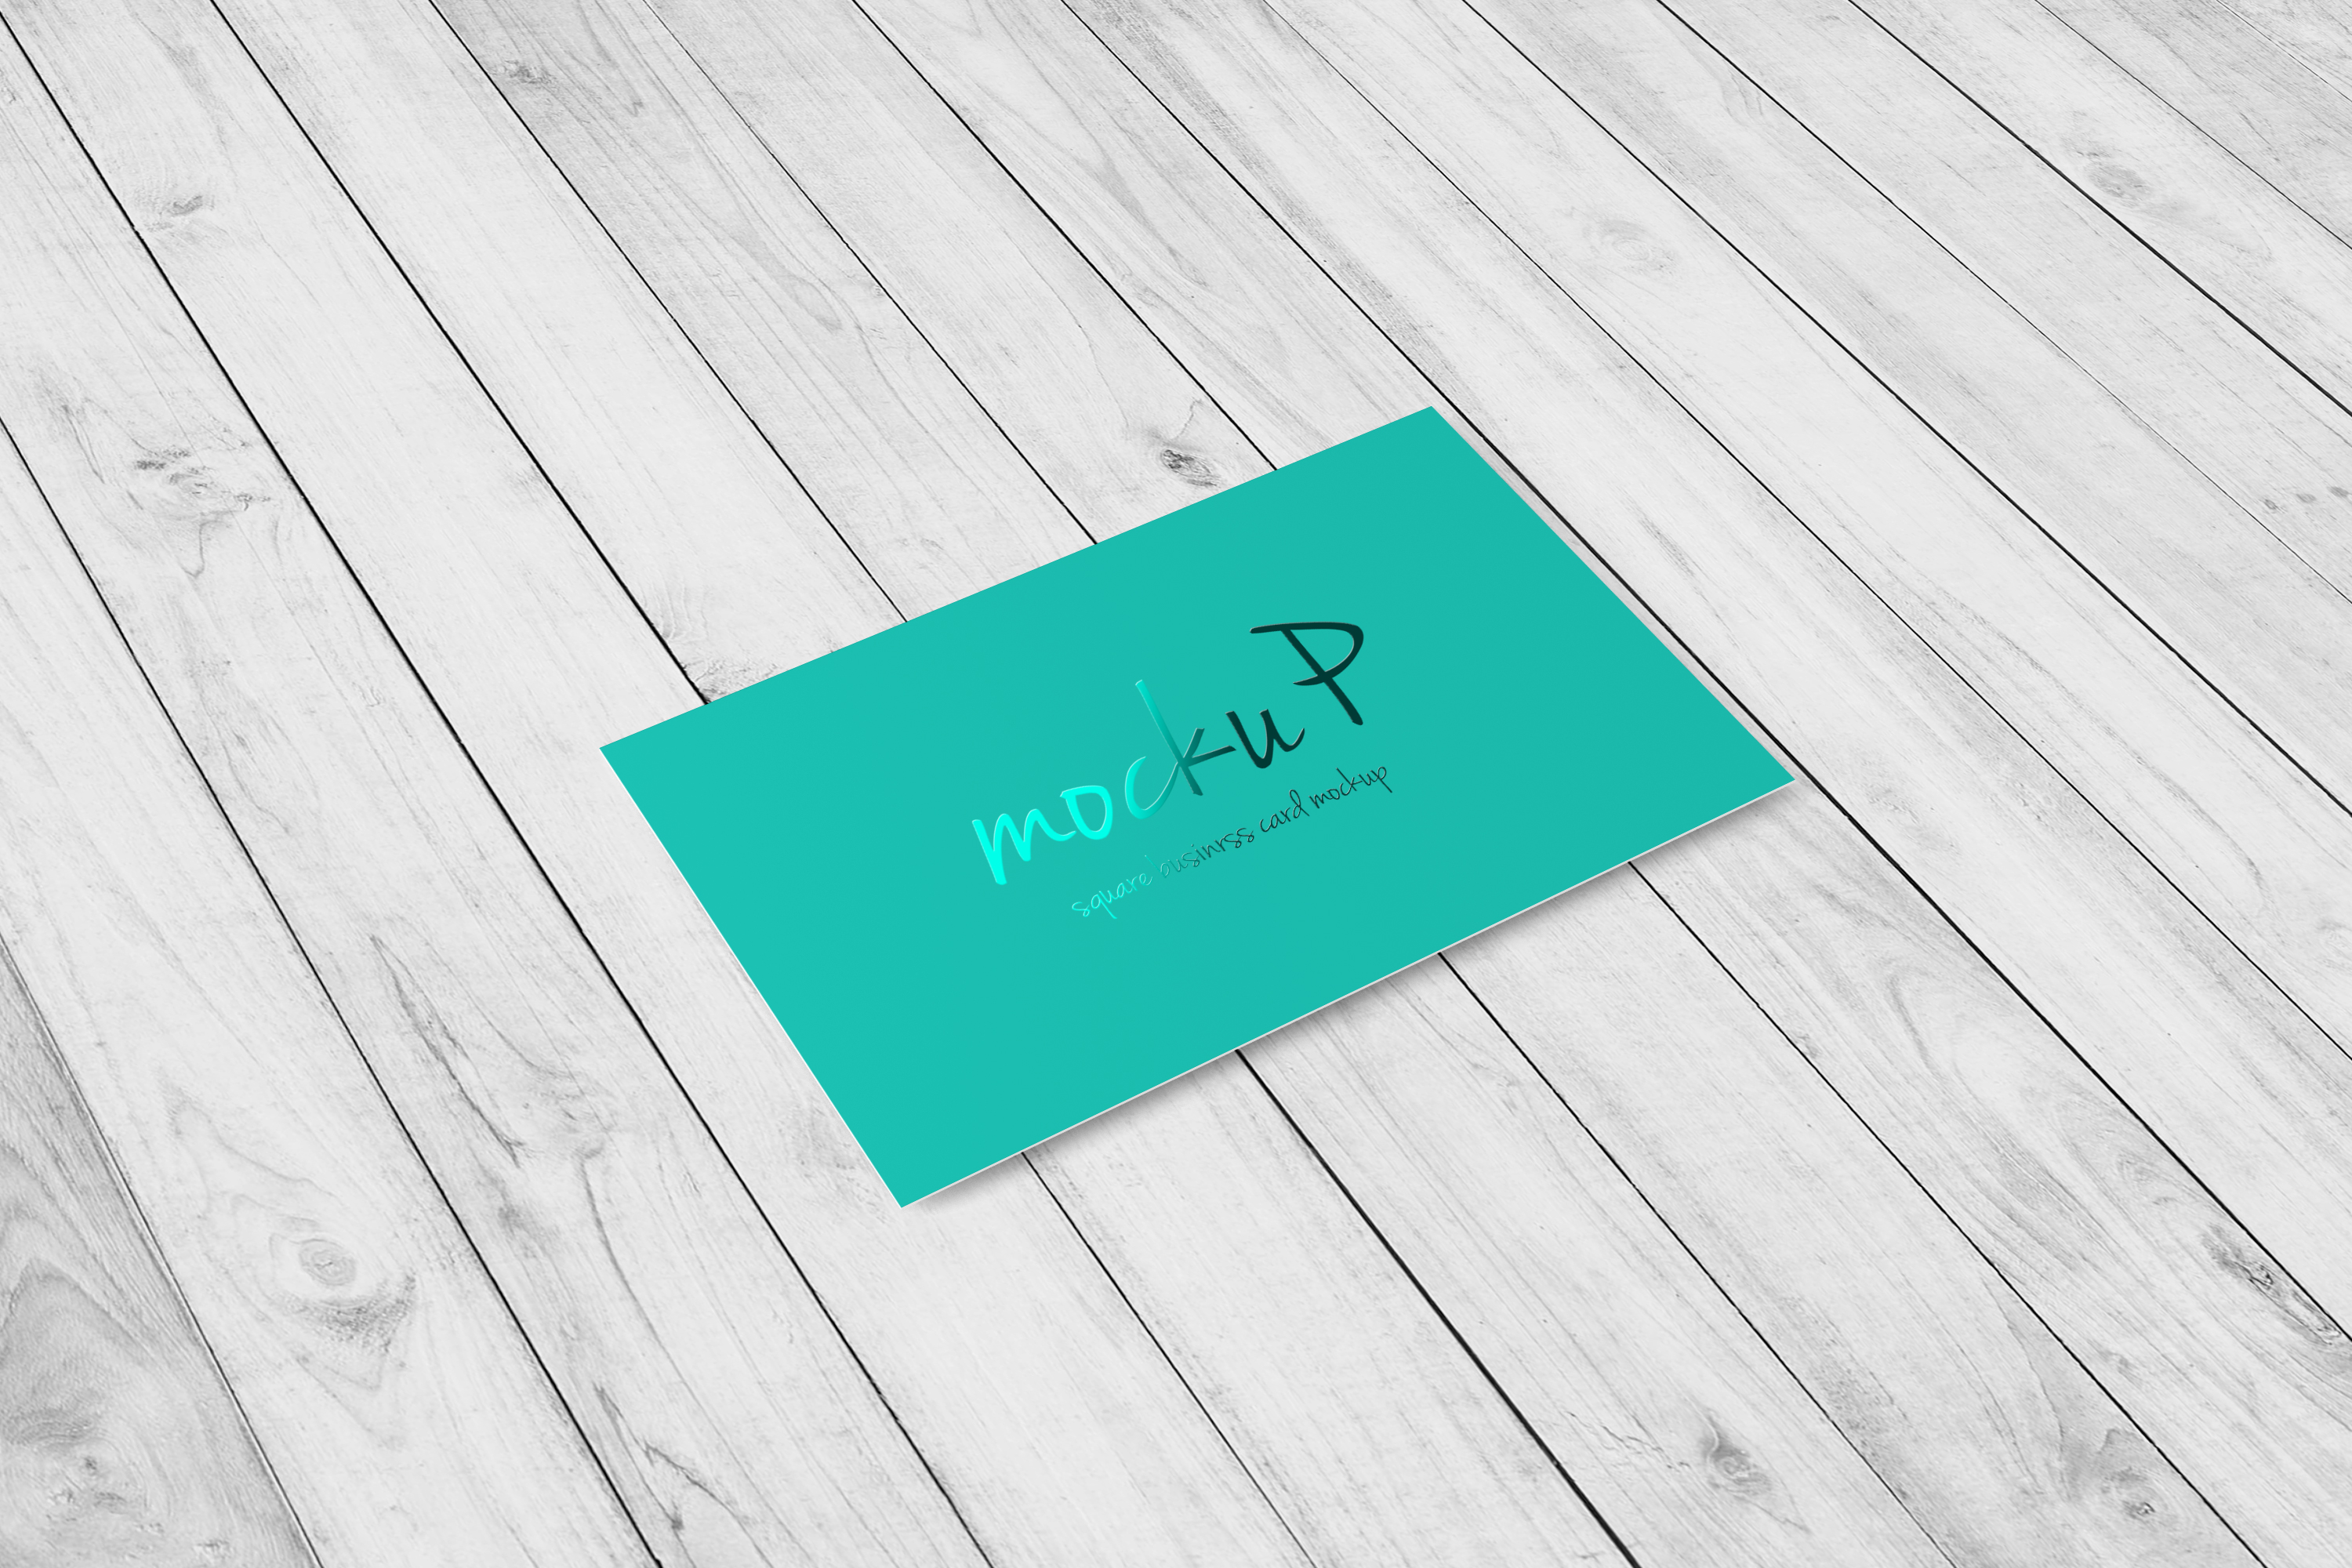 Download 85x55 Business Card Mockup by ToaSin Studio on Dribbble